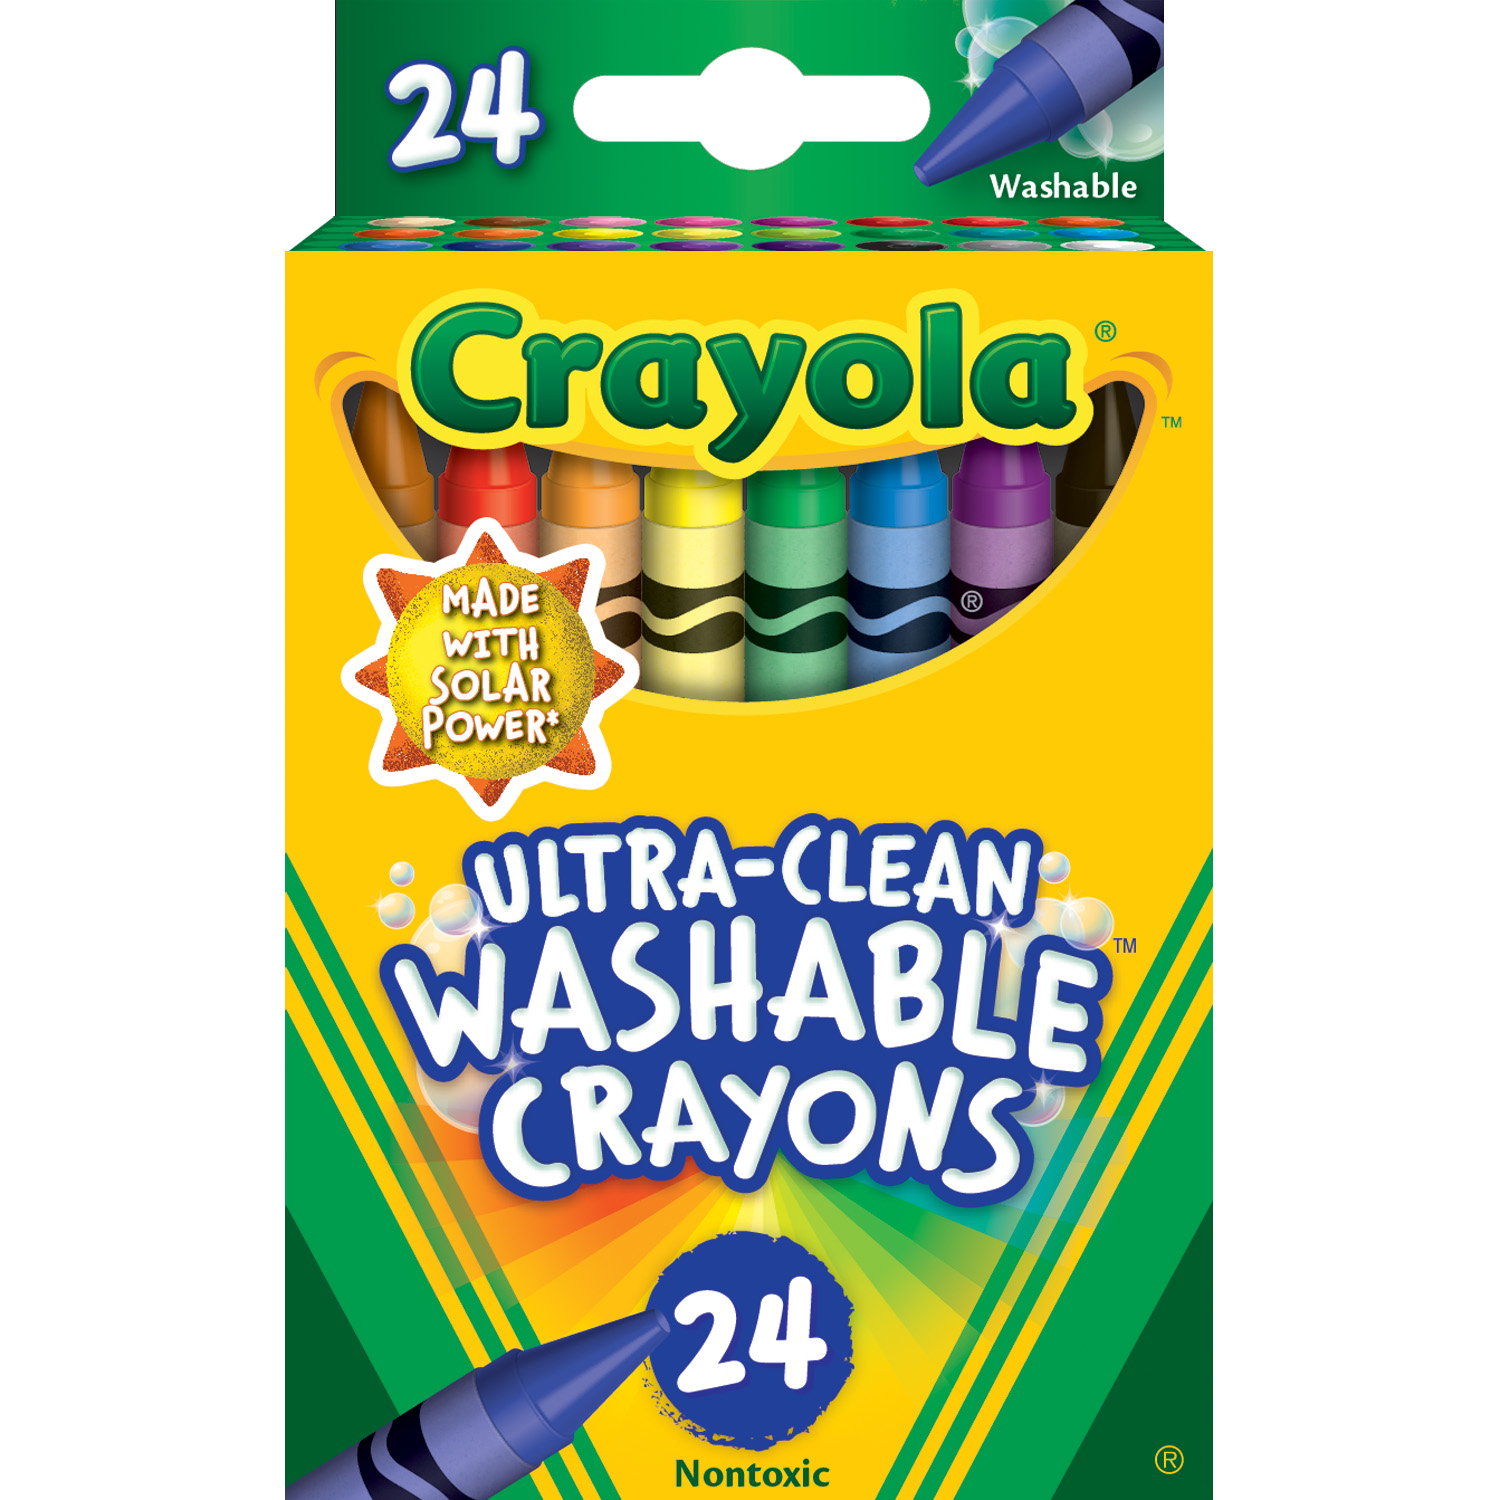 Ultra-Clean Washable Crayons, Regular Size, Pack of 24